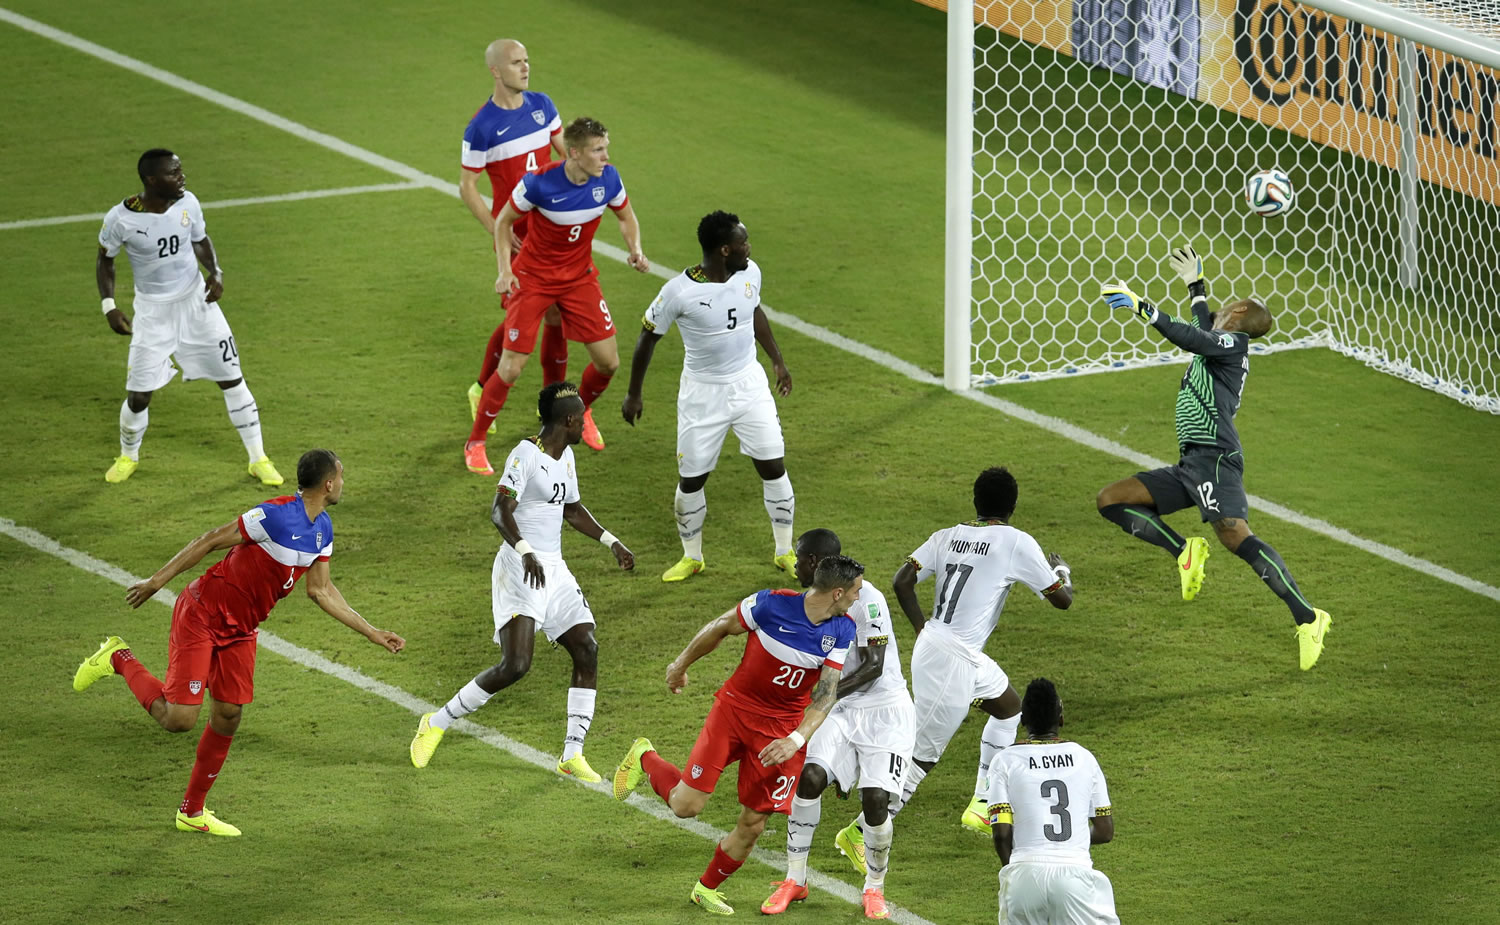 United States' John Brooks, second from left, scores his side's second goal during the group G World Cup soccer match between Ghana and the United States at the Arena das Dunas in Natal, Brazil, Monday.